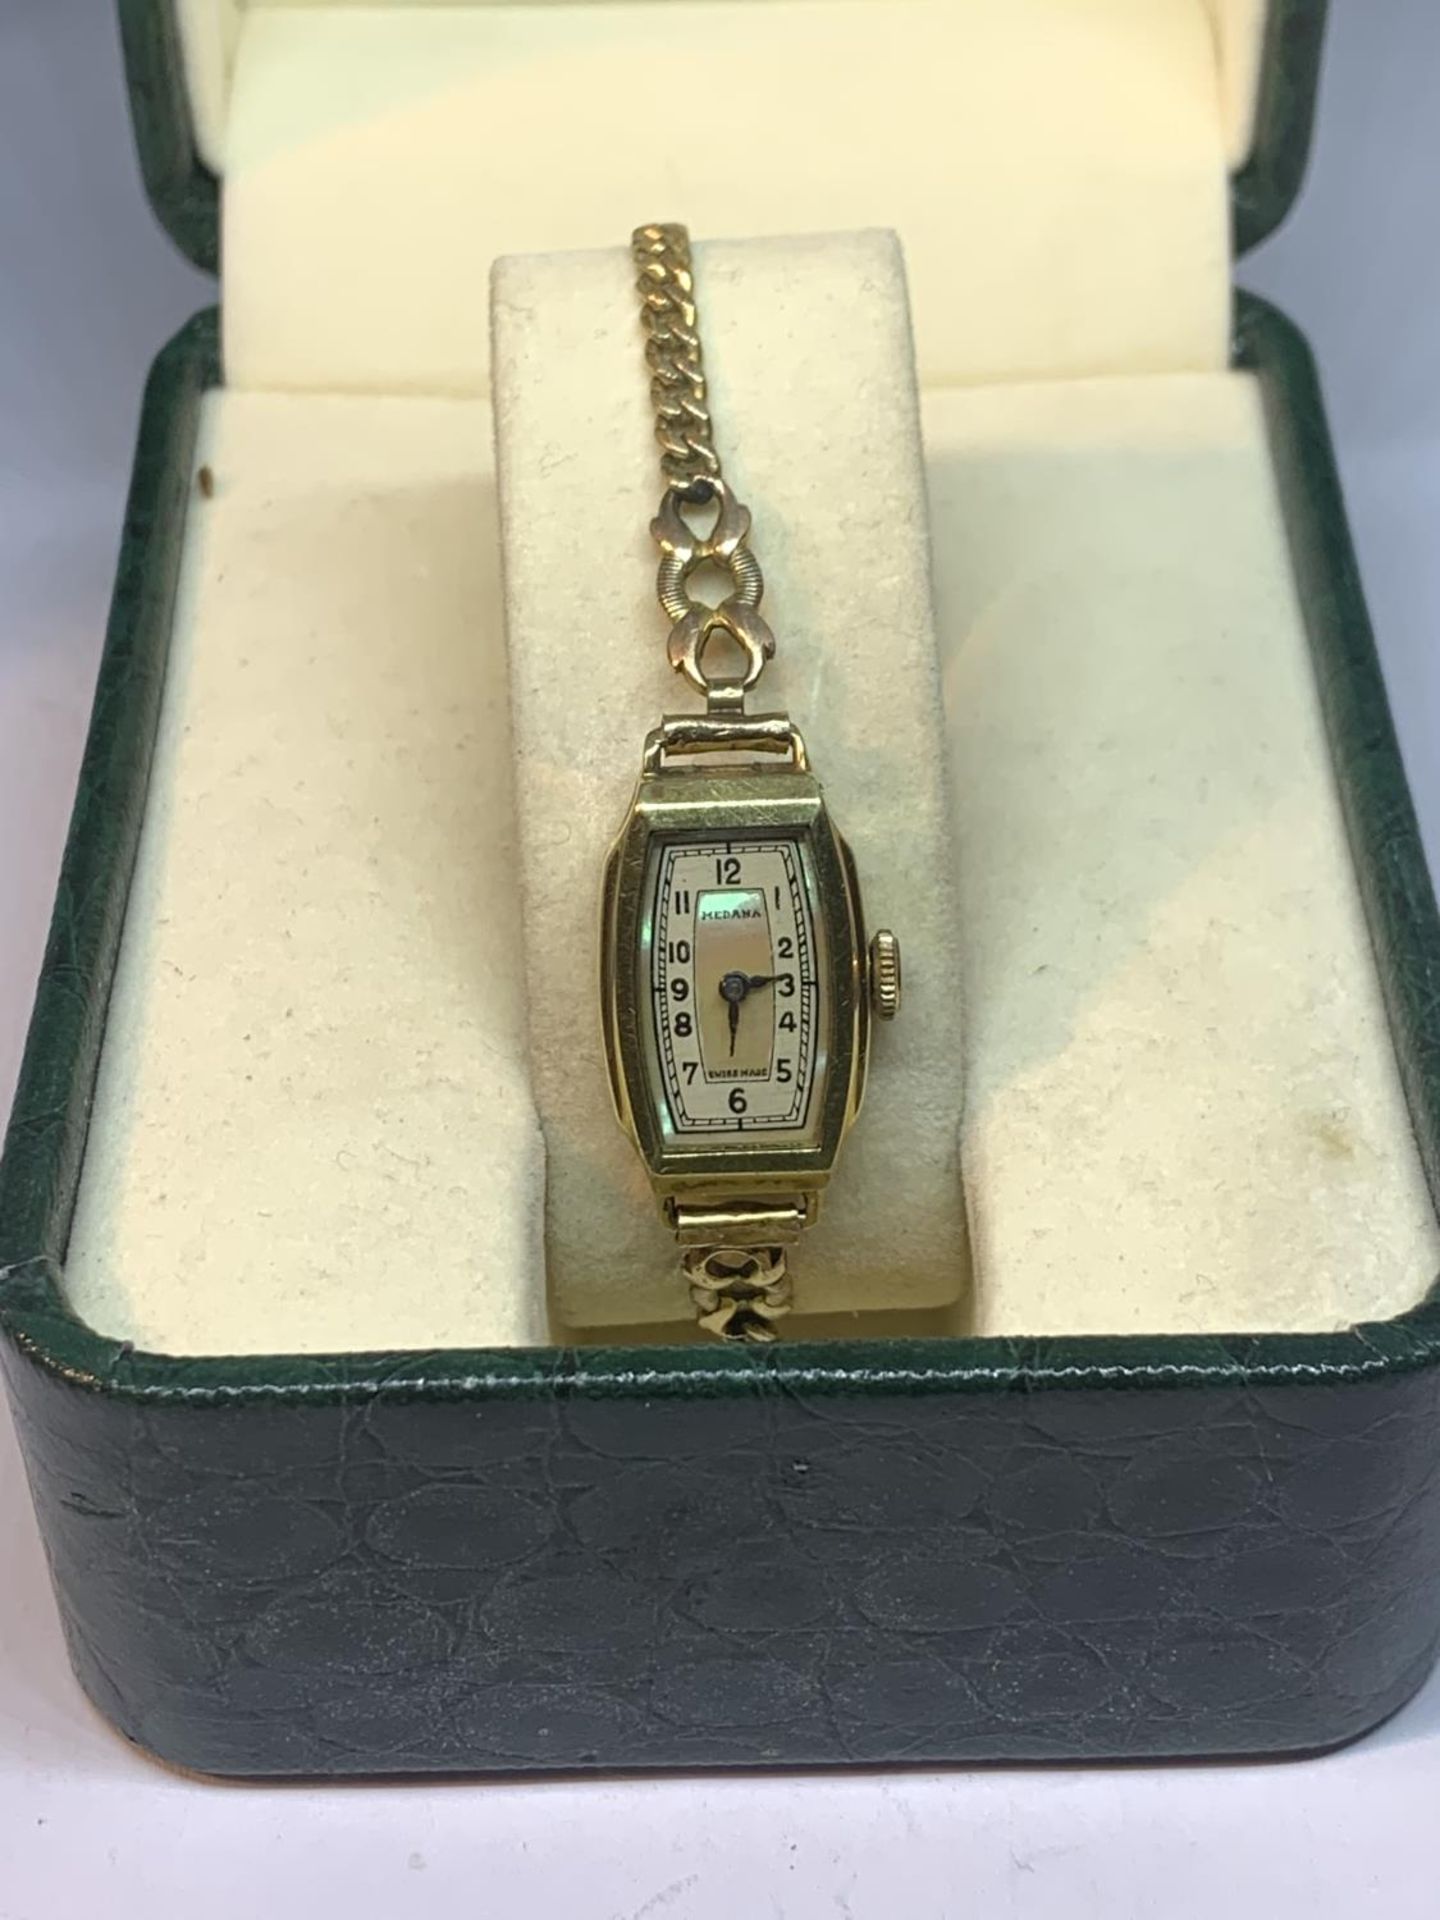 A YELLOW METAL WRISTWATCH WITH PEARLISED RECTANGUALR STYLE FACE IN A PRESENTATION BOX